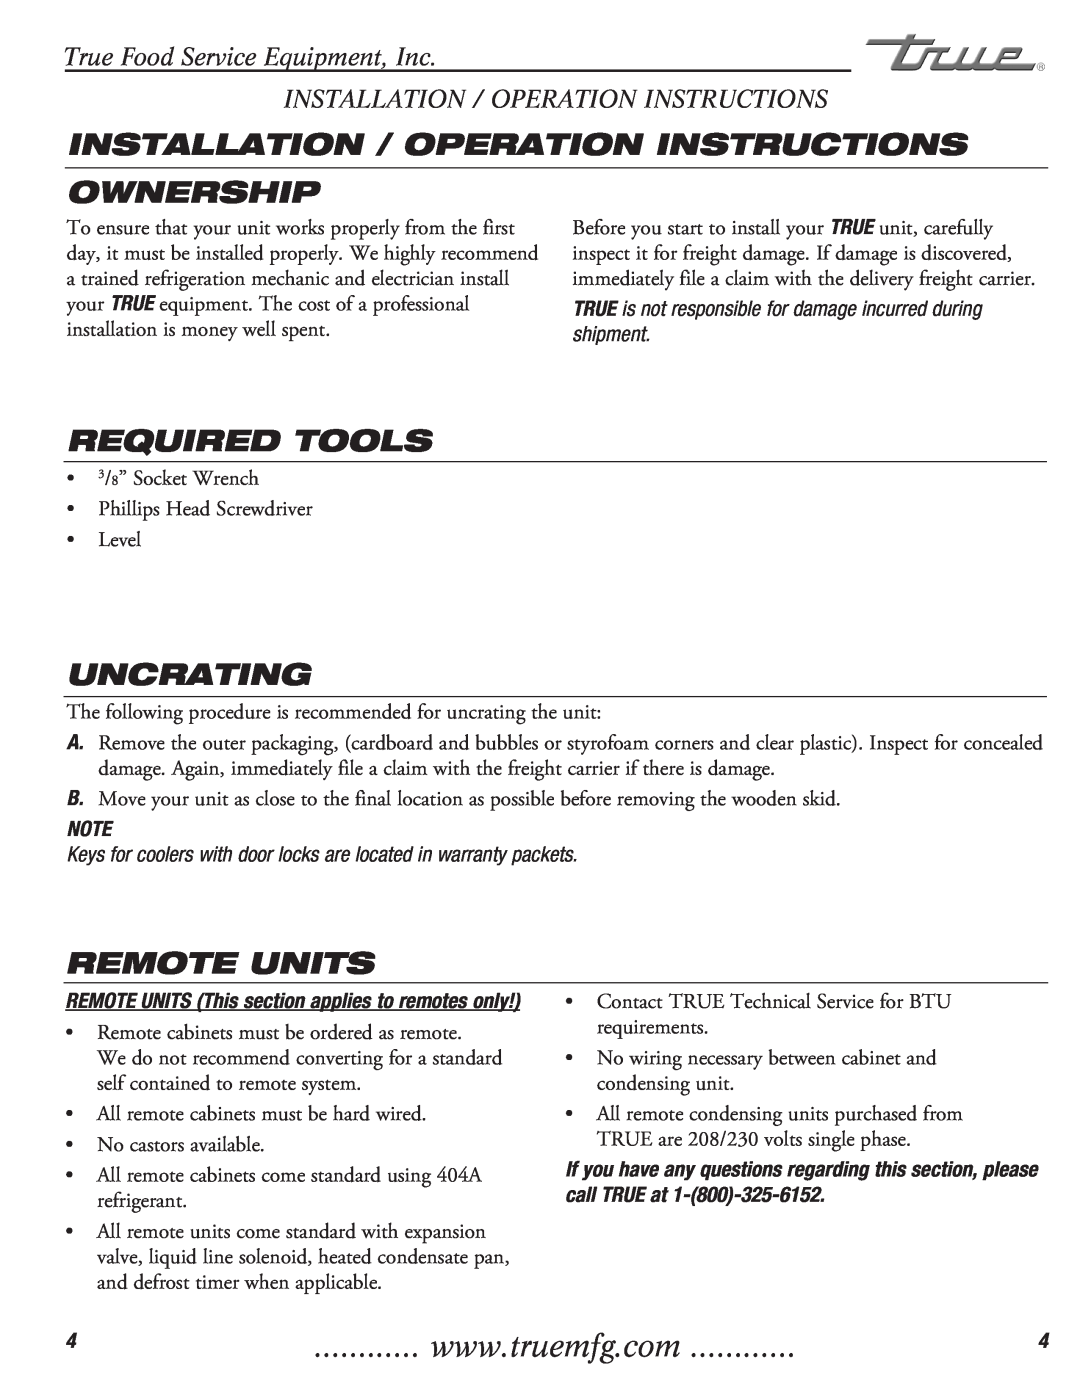 True Manufacturing Company TFP-32-12M-D-2 Installation / Operation Instructions, Ownership, Required Tools, Uncrating 